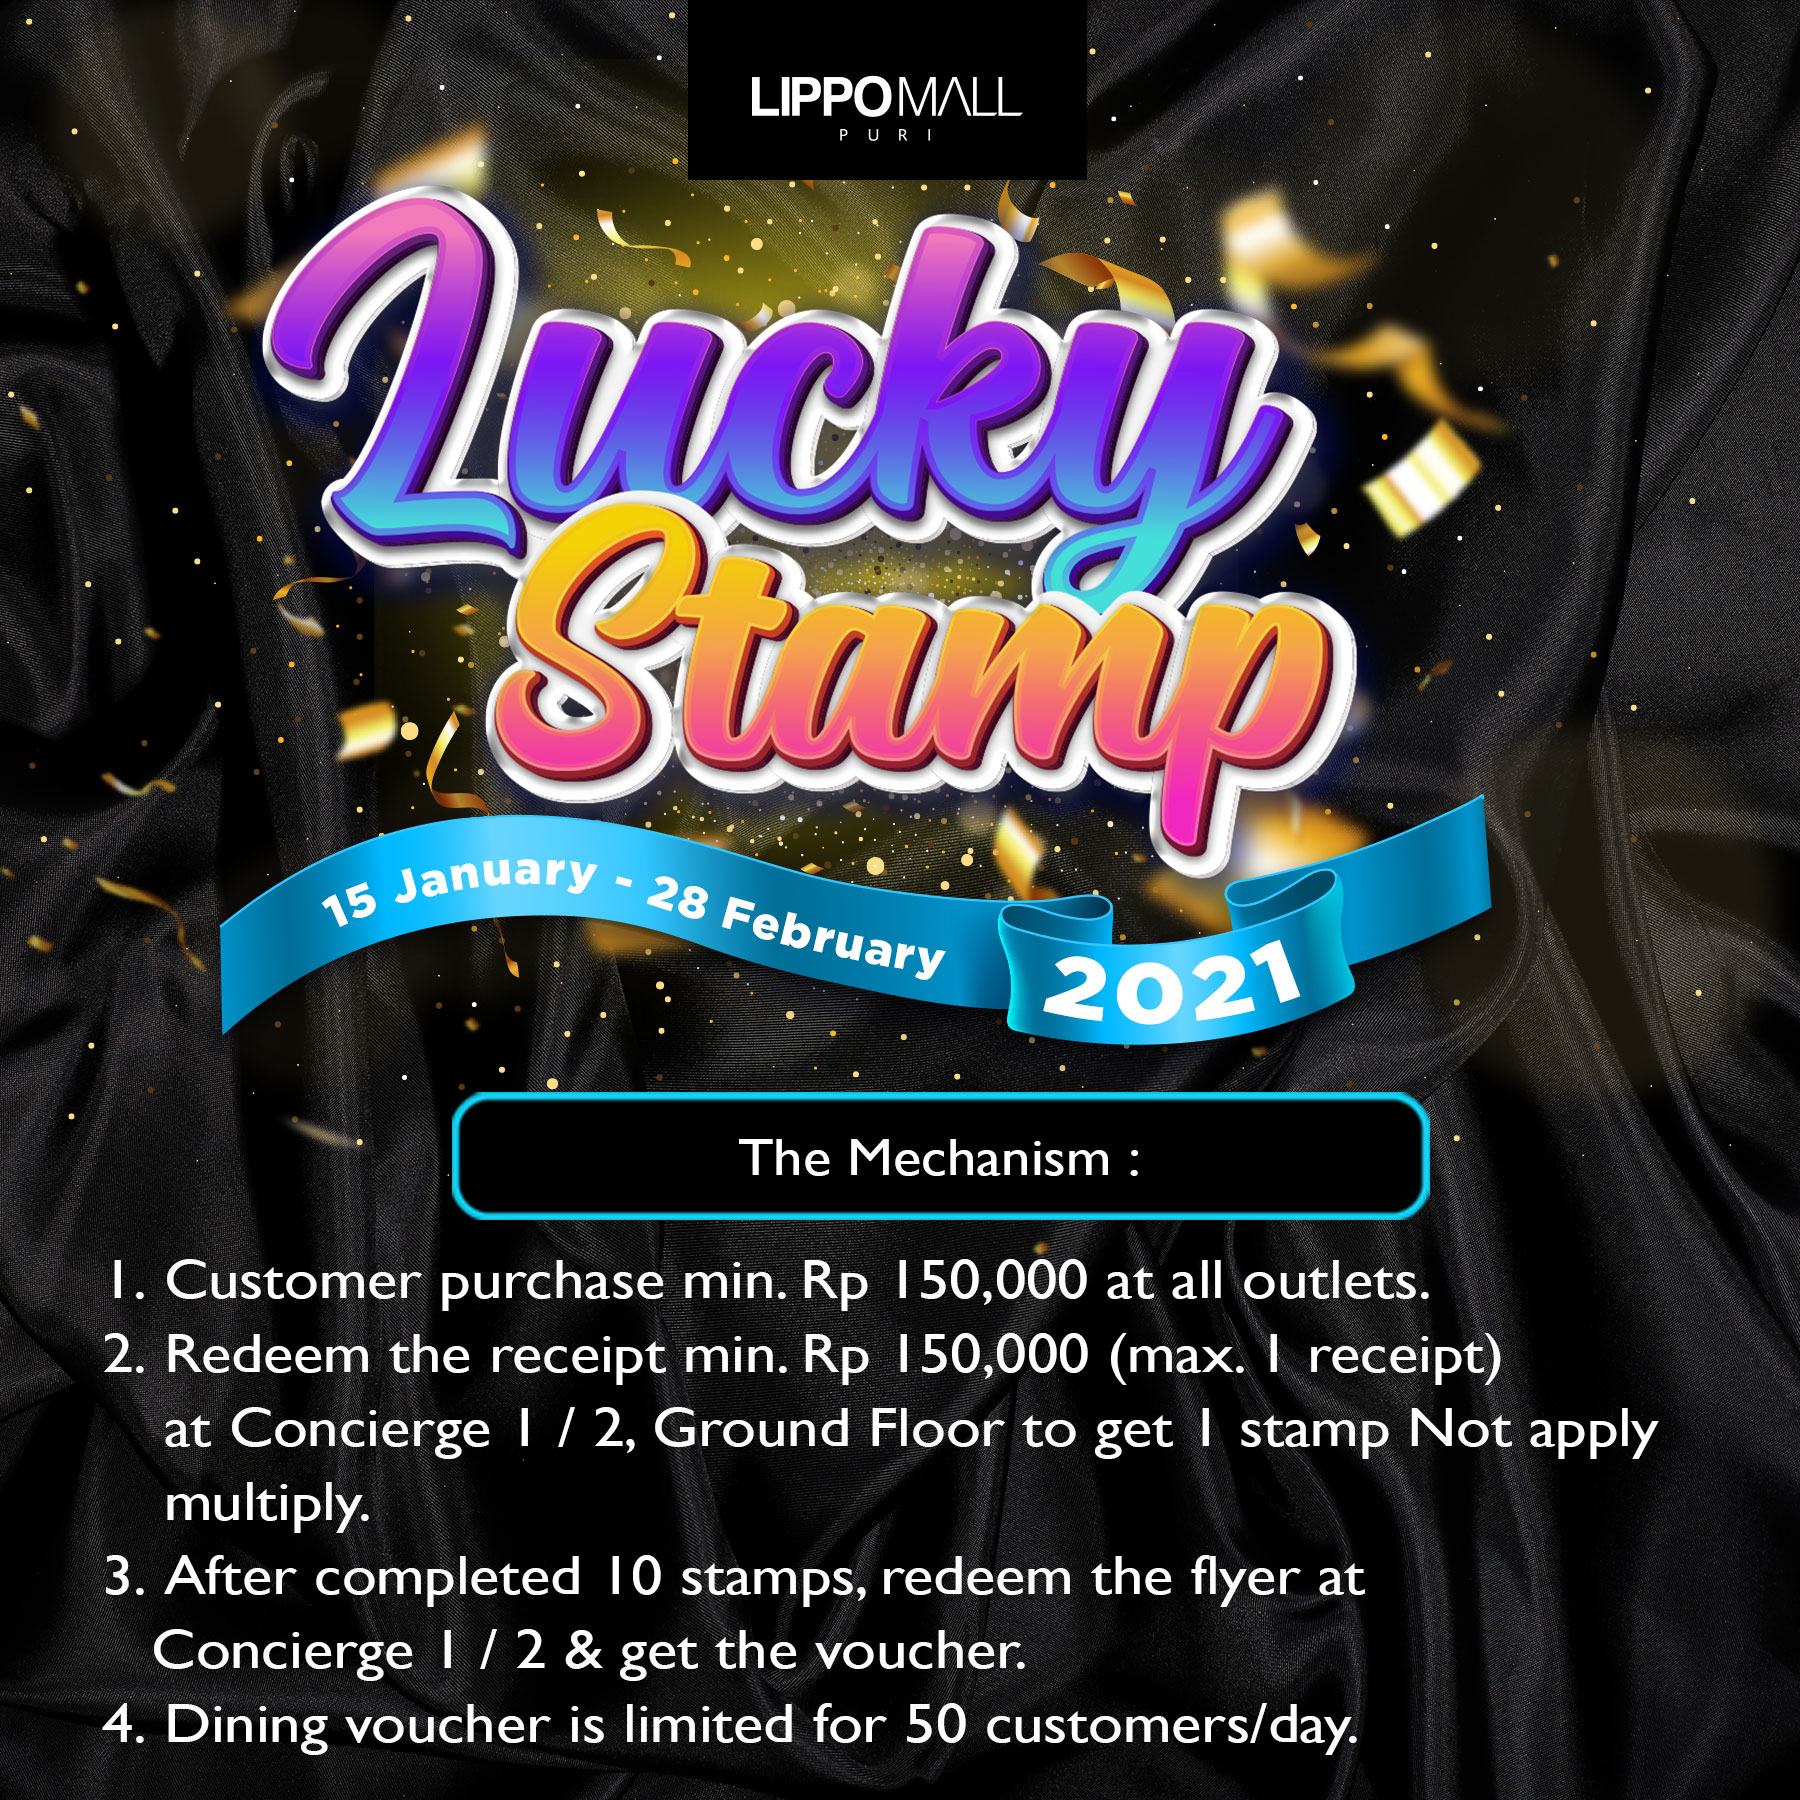 Lucky Stamp Promo in lippo mall puri st. moritz